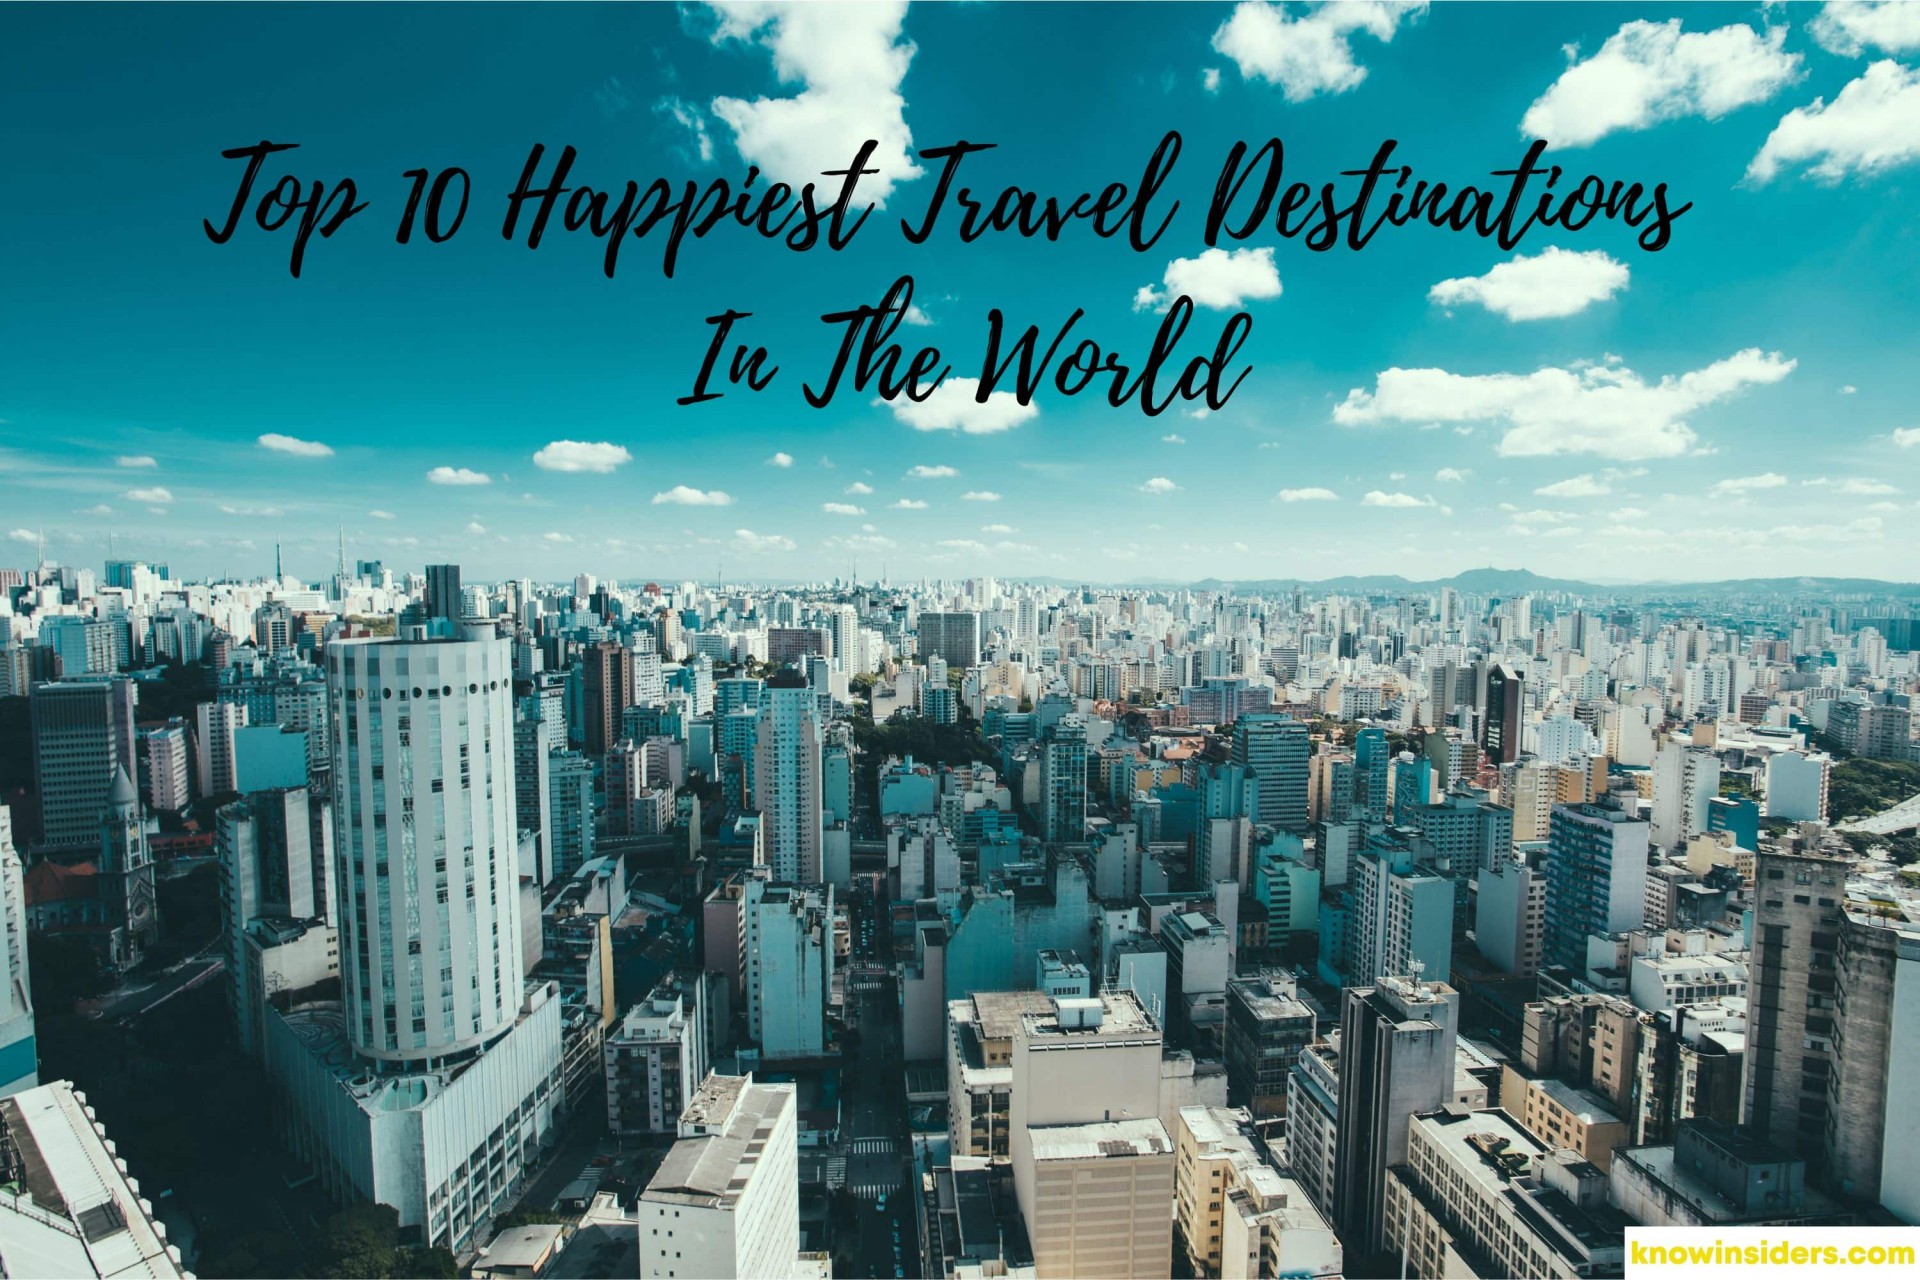 Top 10 Happiest Travel Places In The World to Visit